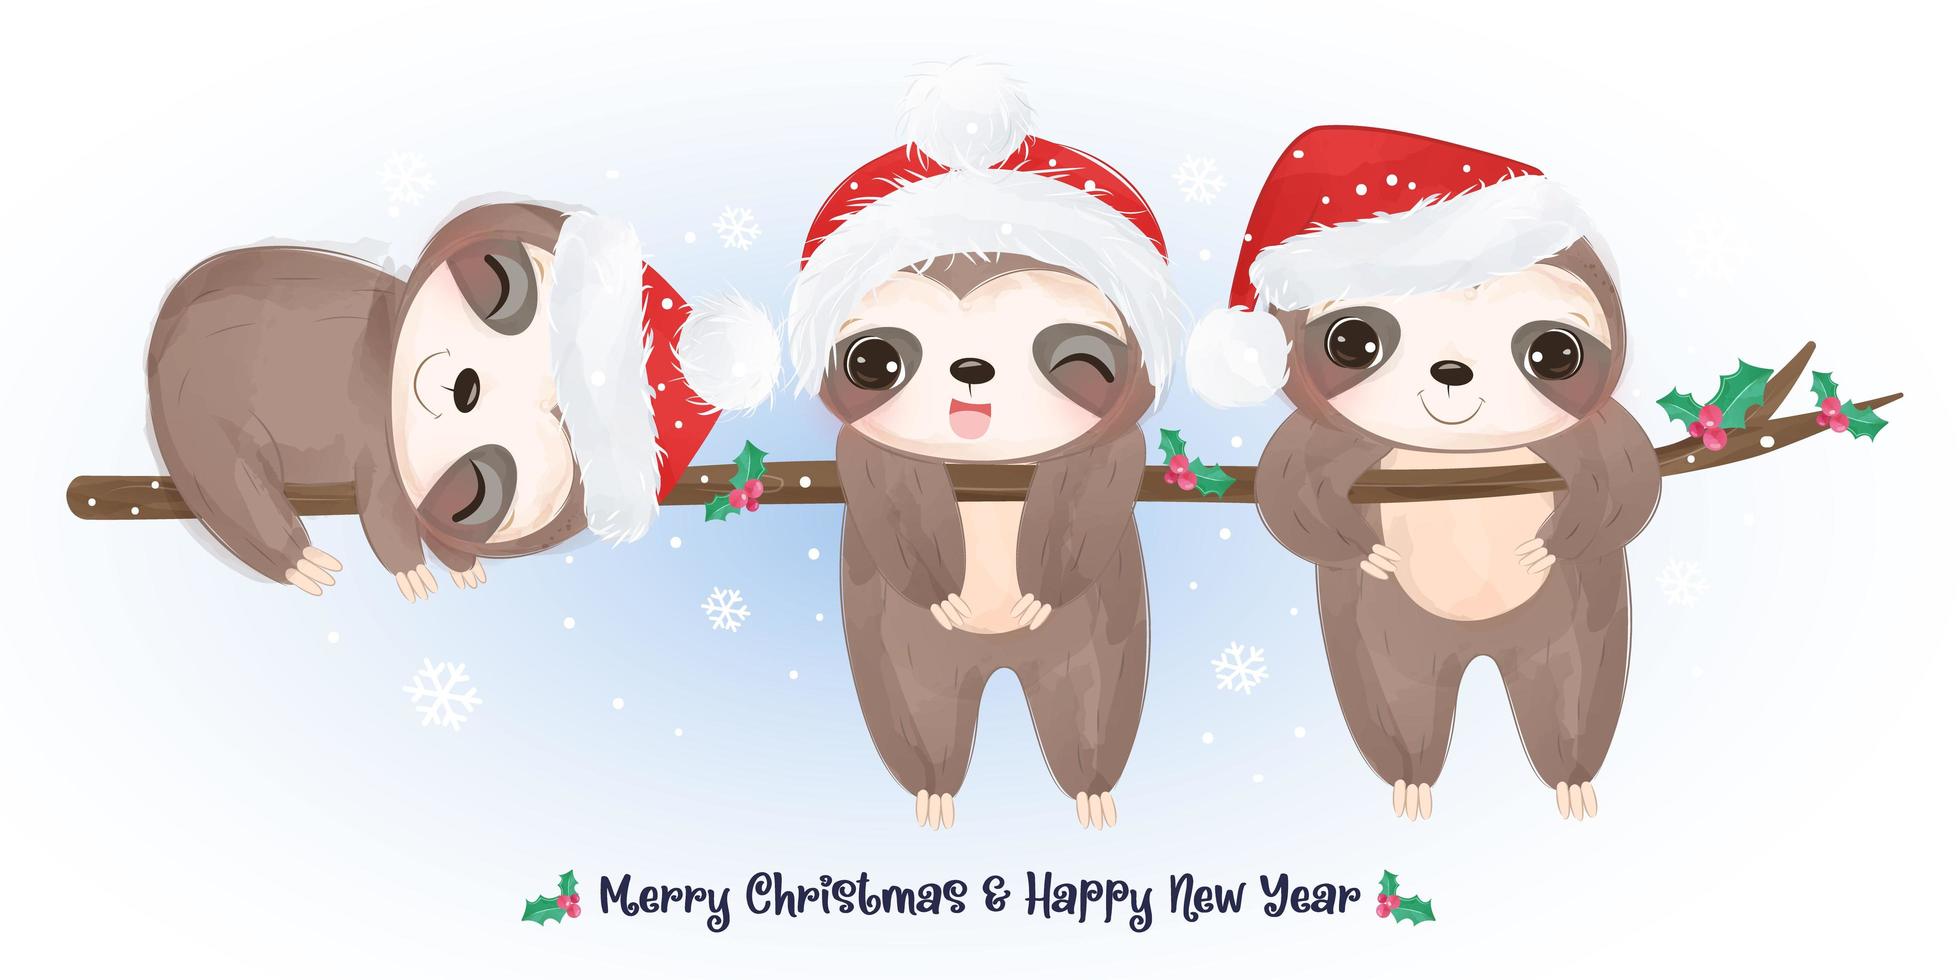 Christmas greeting card with cute sloths vector